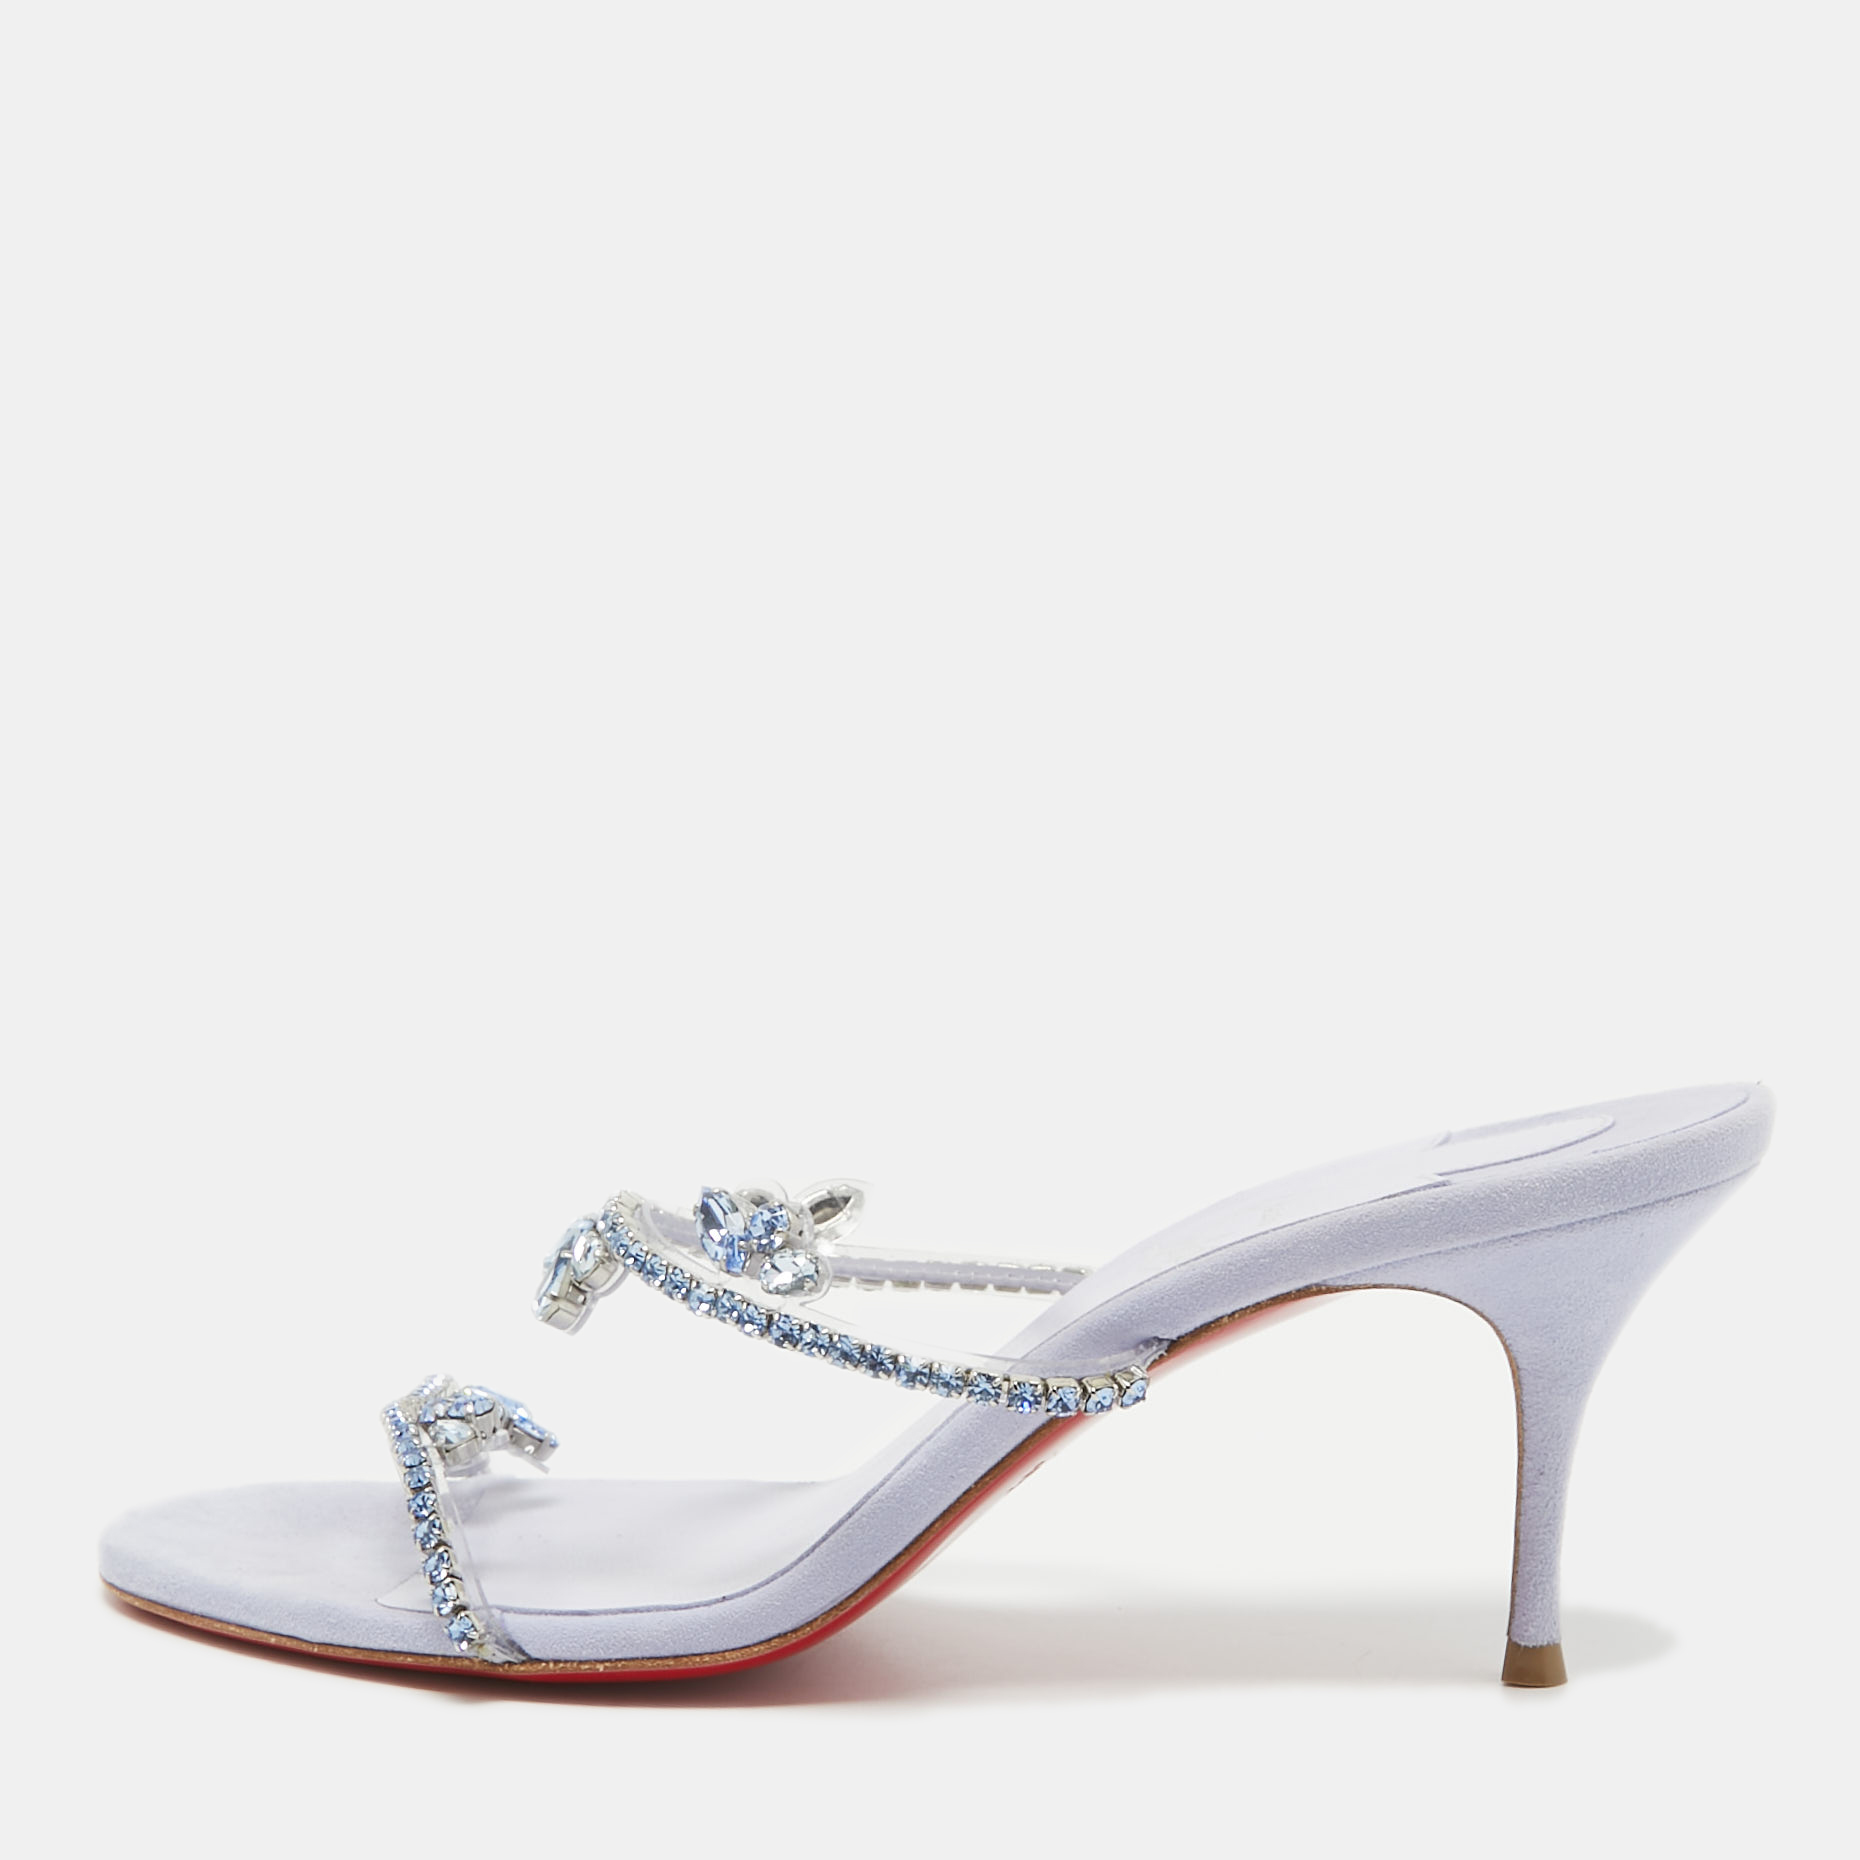 Pre-owned Christian Louboutin Light Purple Crystal Embellished Pvc Just Queen Slide Sandals Size 38